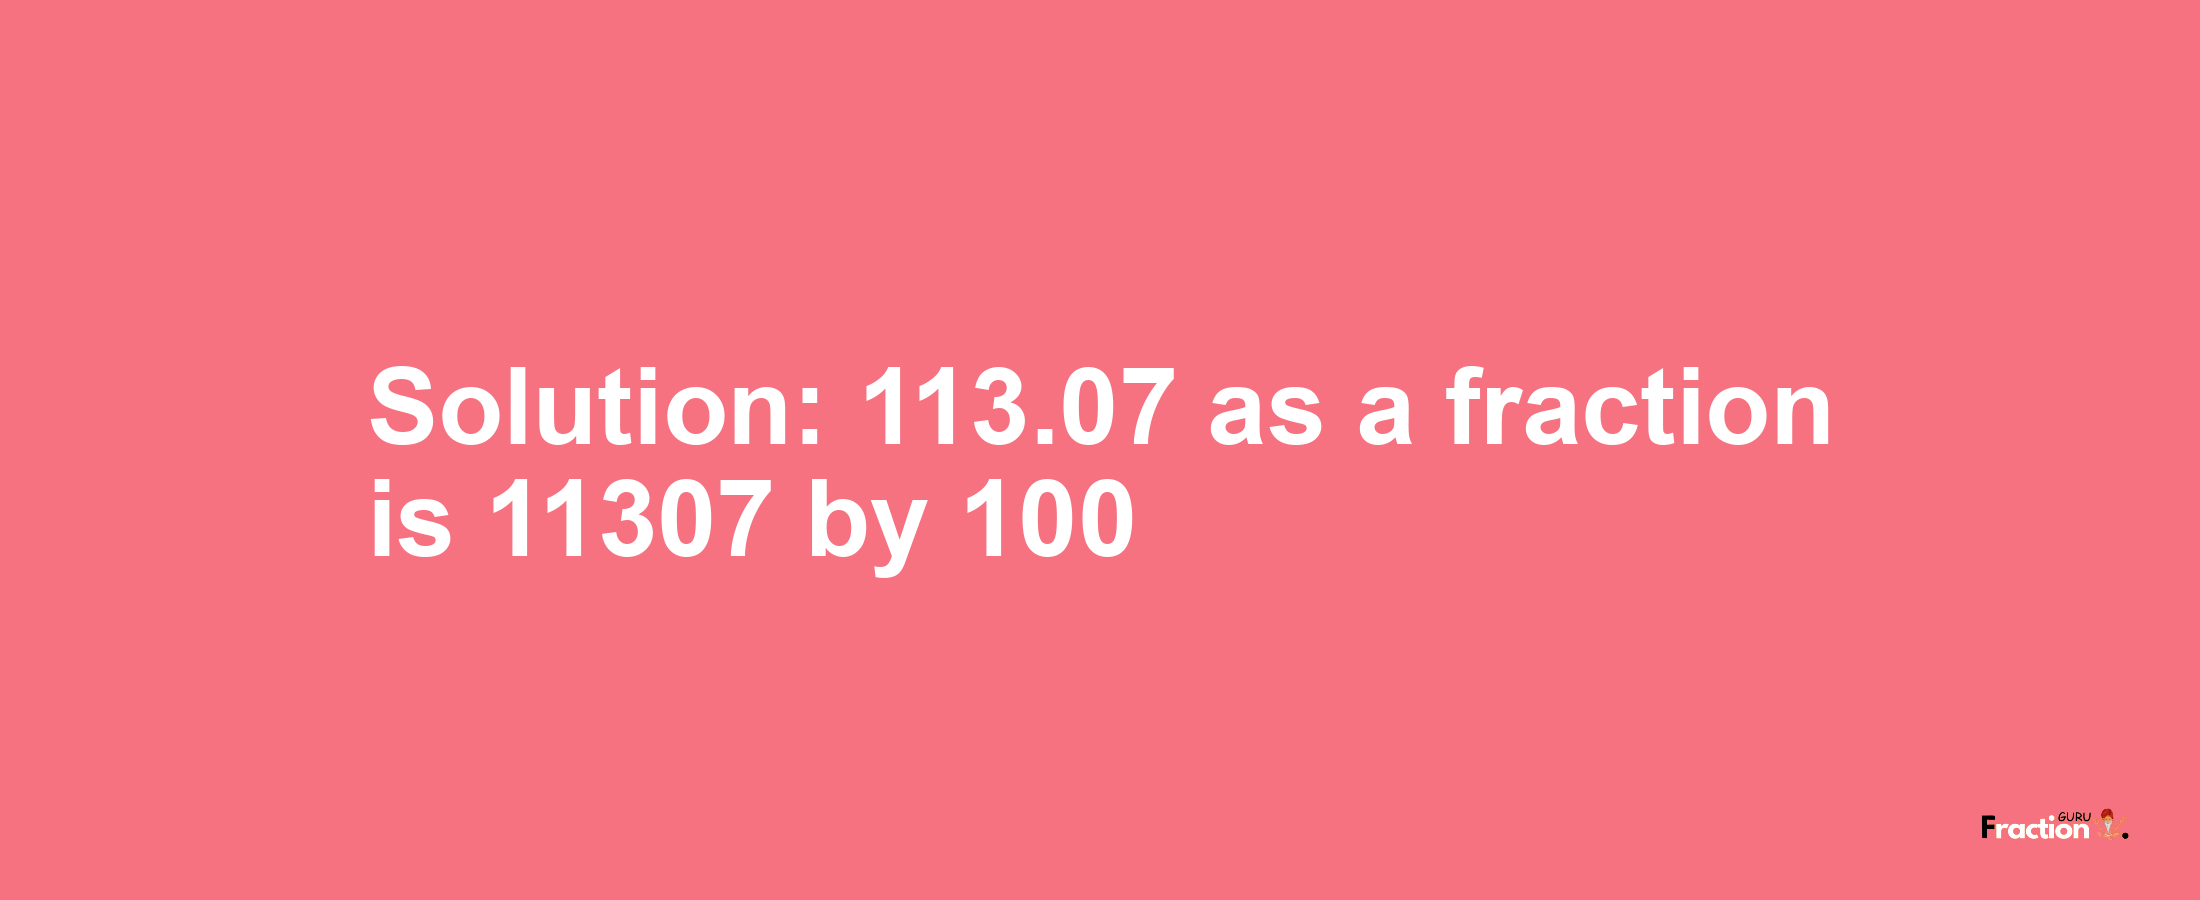 Solution:113.07 as a fraction is 11307/100